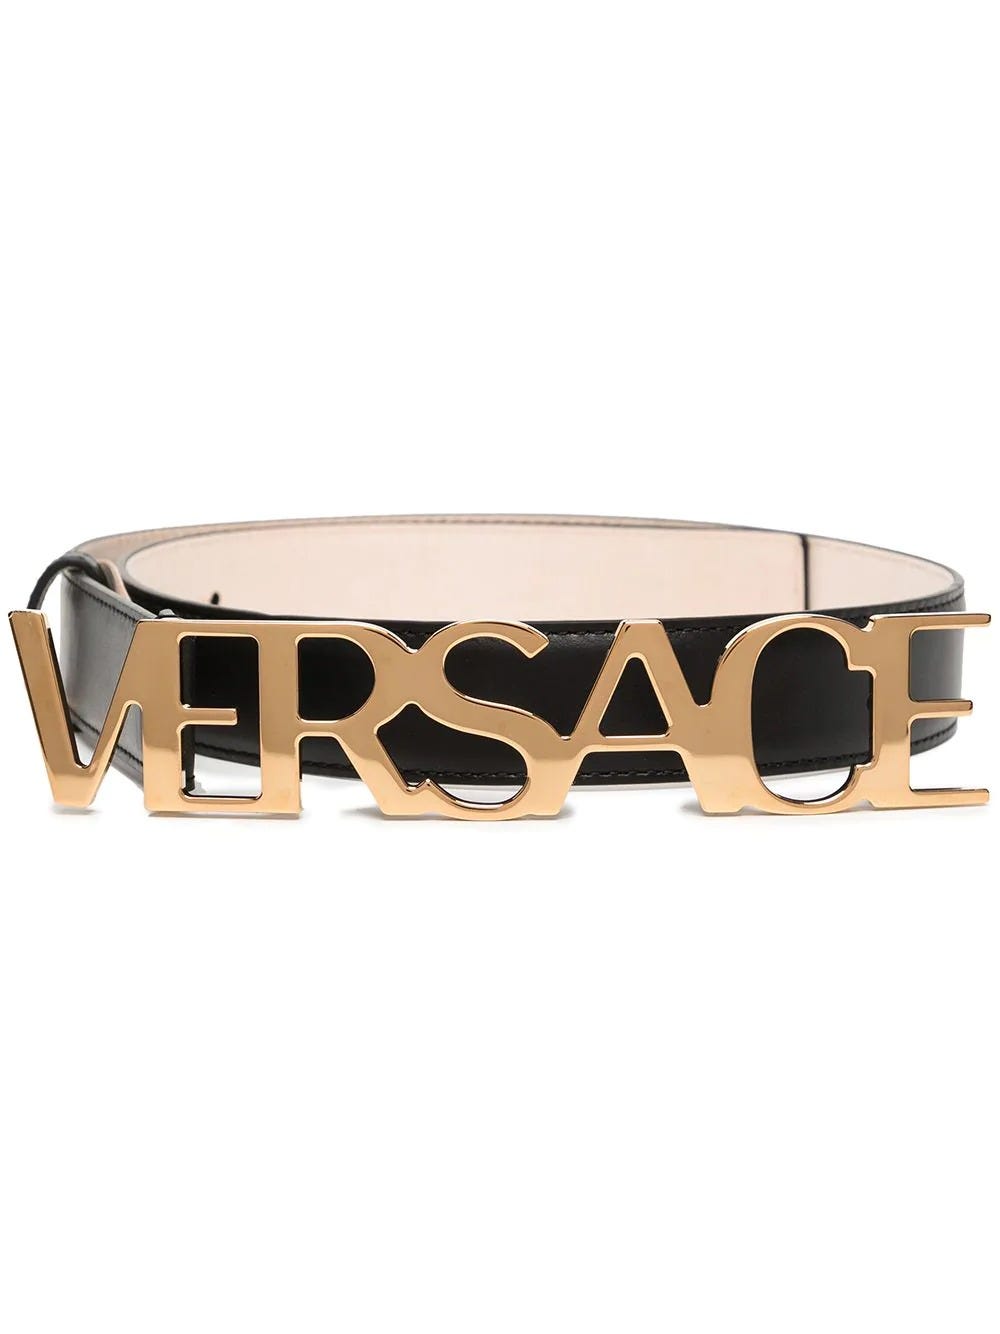 VERSACE BLACK LEATHER BELT WITH GOLD LOGO PLAQUE